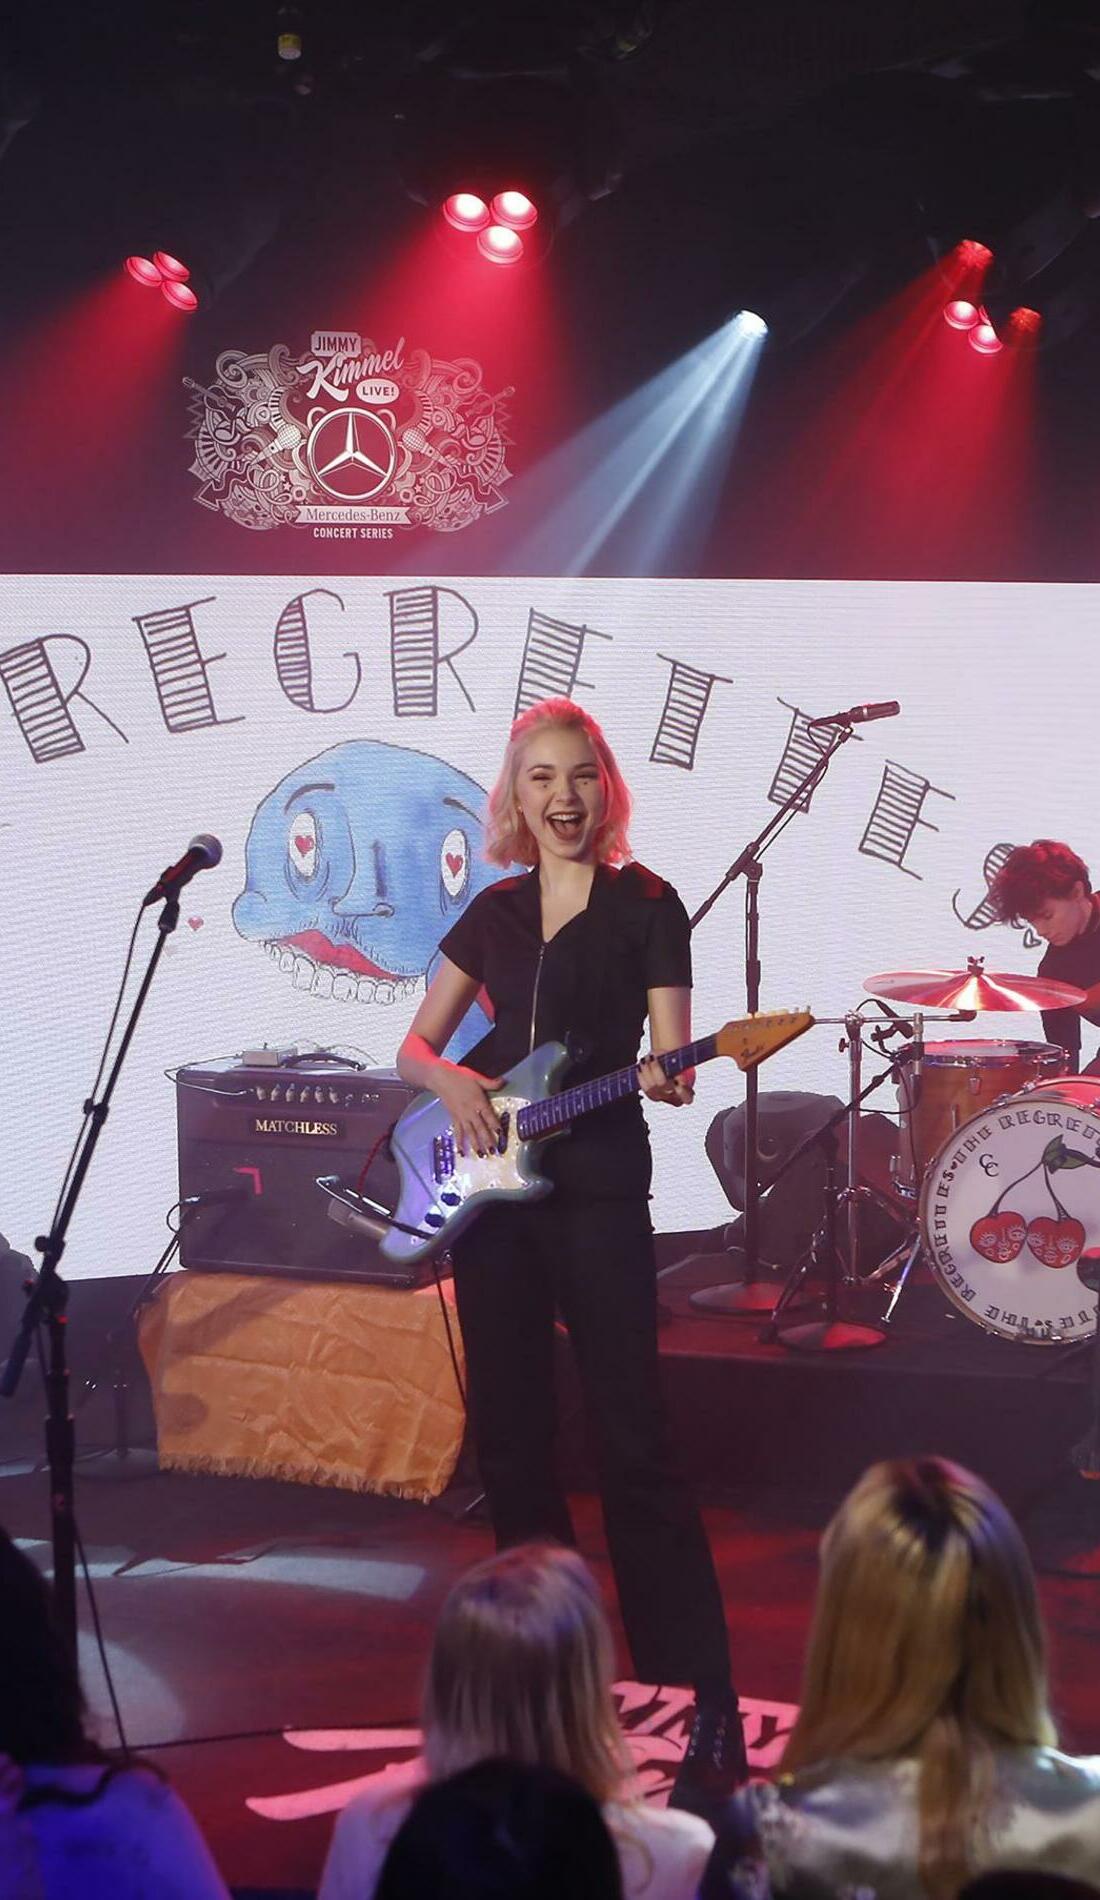 A The Regrettes live event